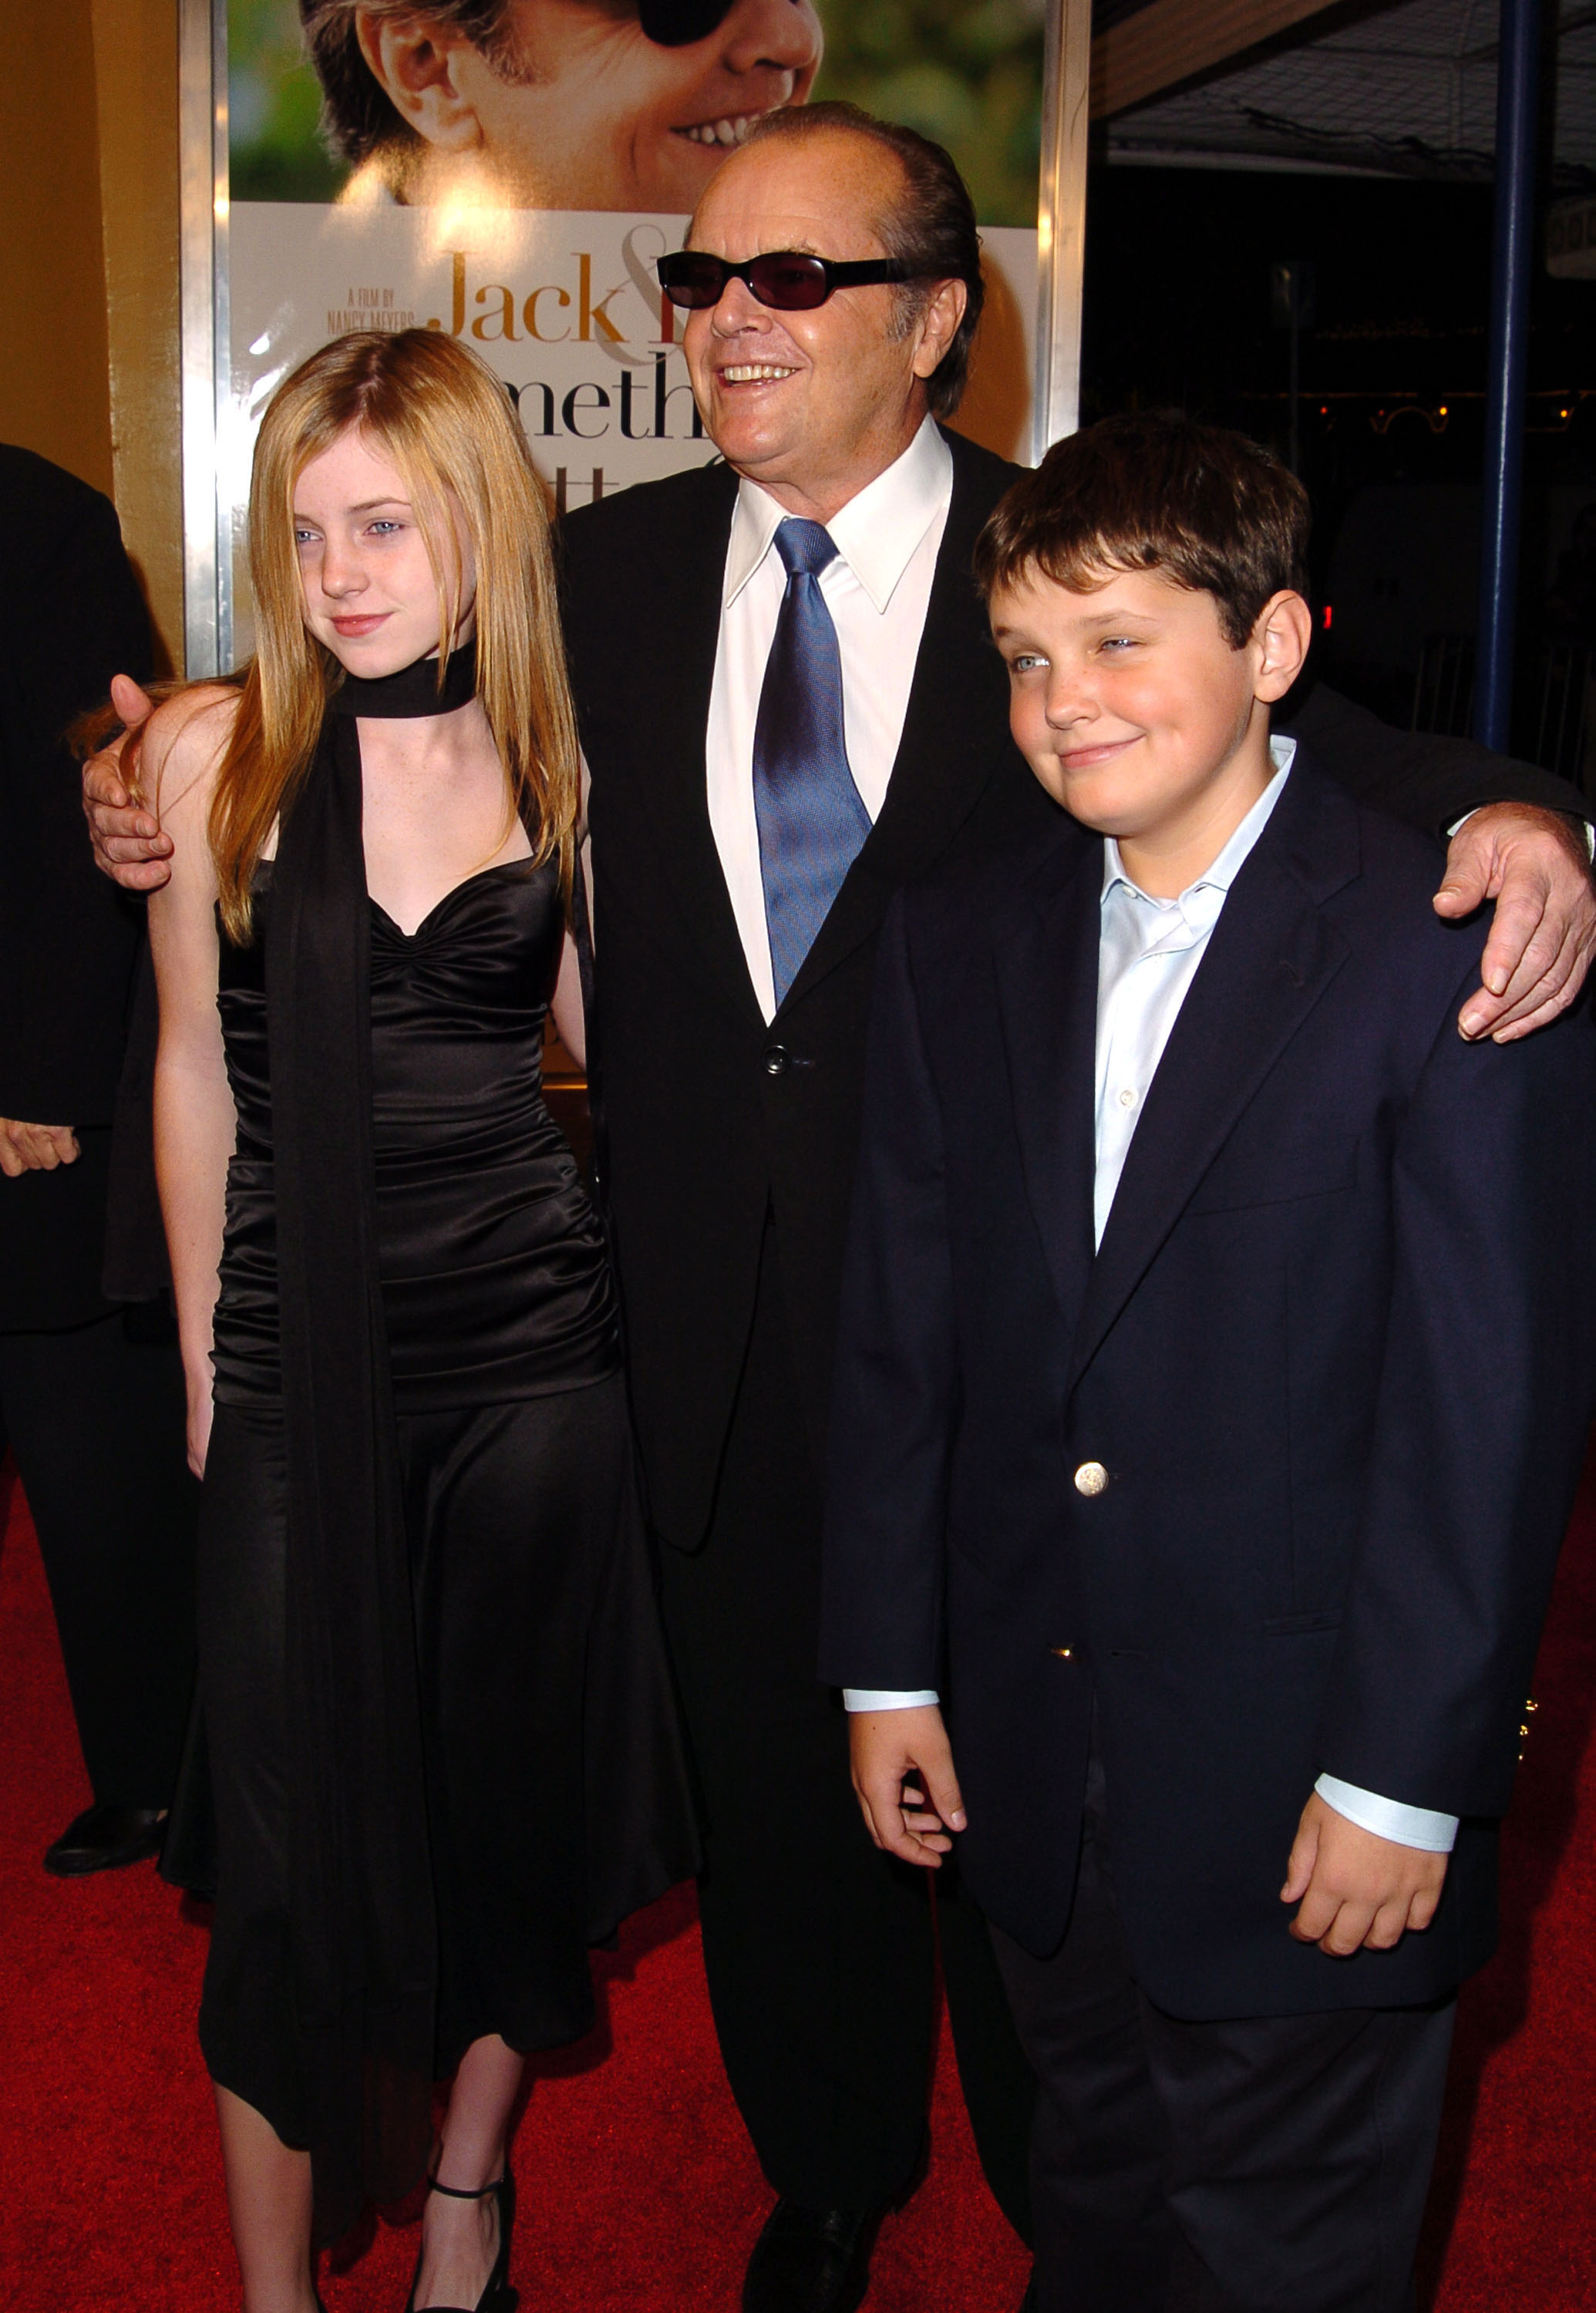 Jack Nicholson and his kids Lorraine and Raymond in California in 2003 | Source: Getty Images